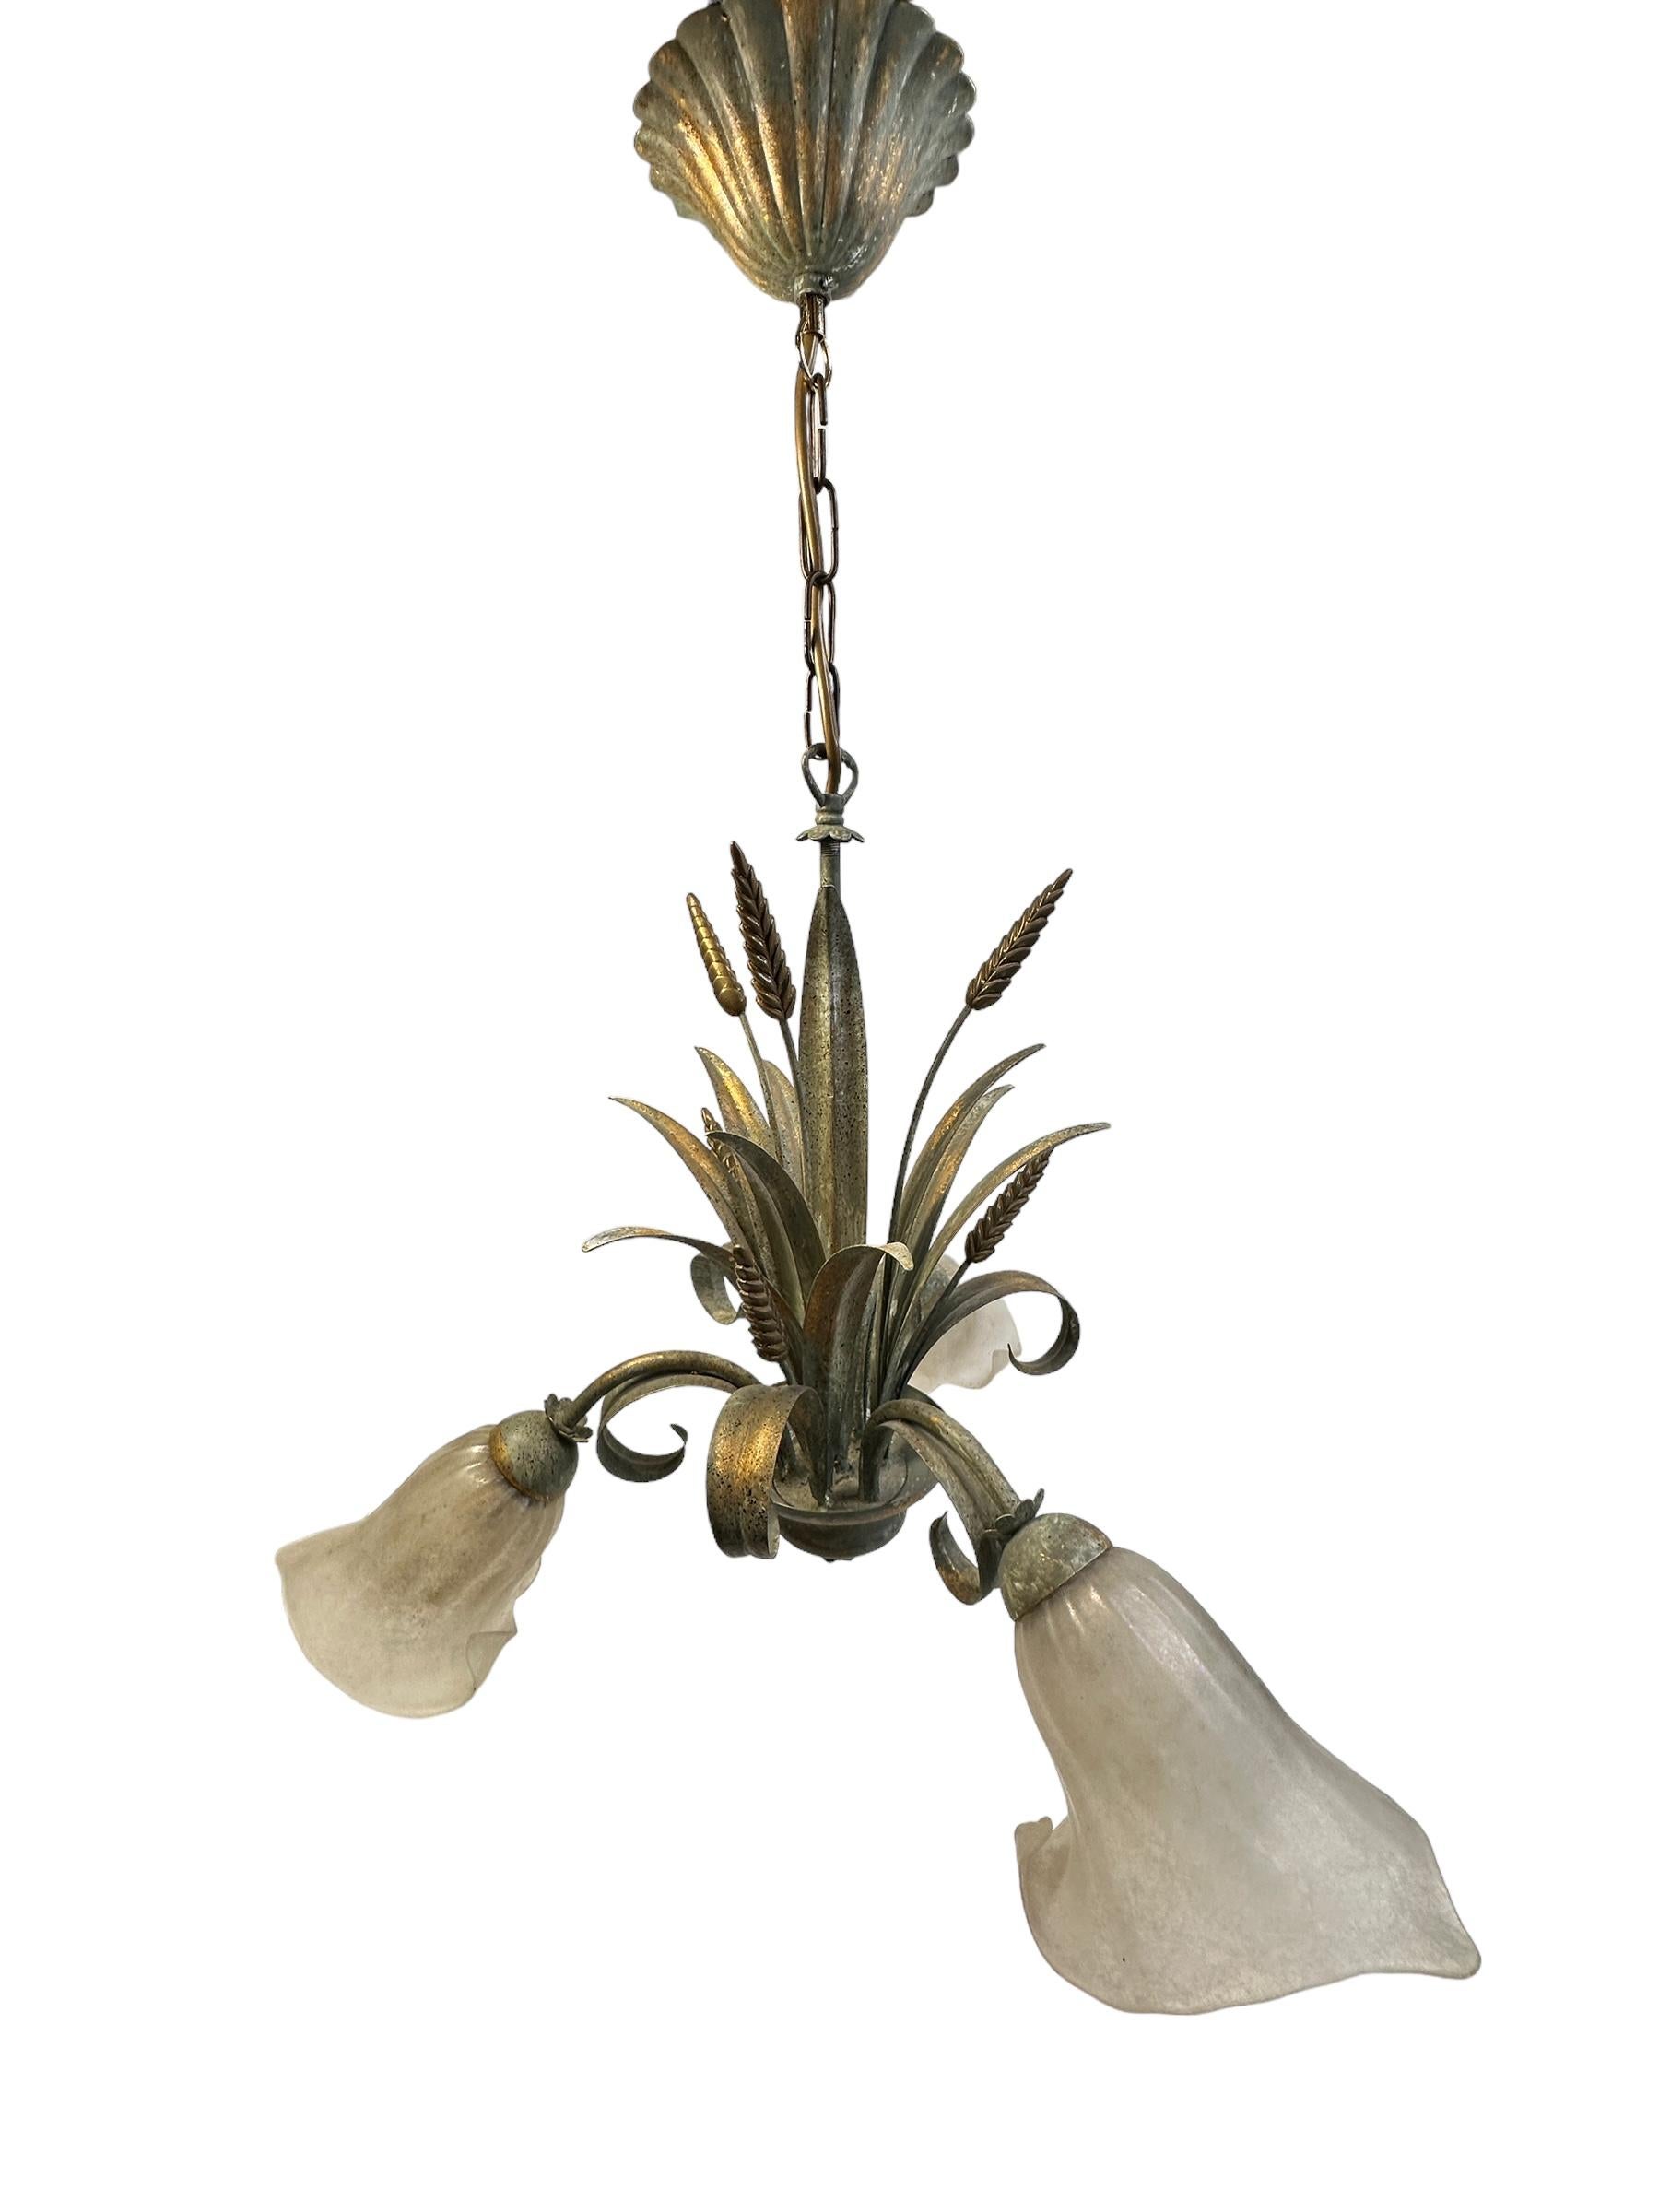 Metal & Glass Shade Wheat Sheaf Chandelier Tole Toleware Coco Chanel Style For Sale 2